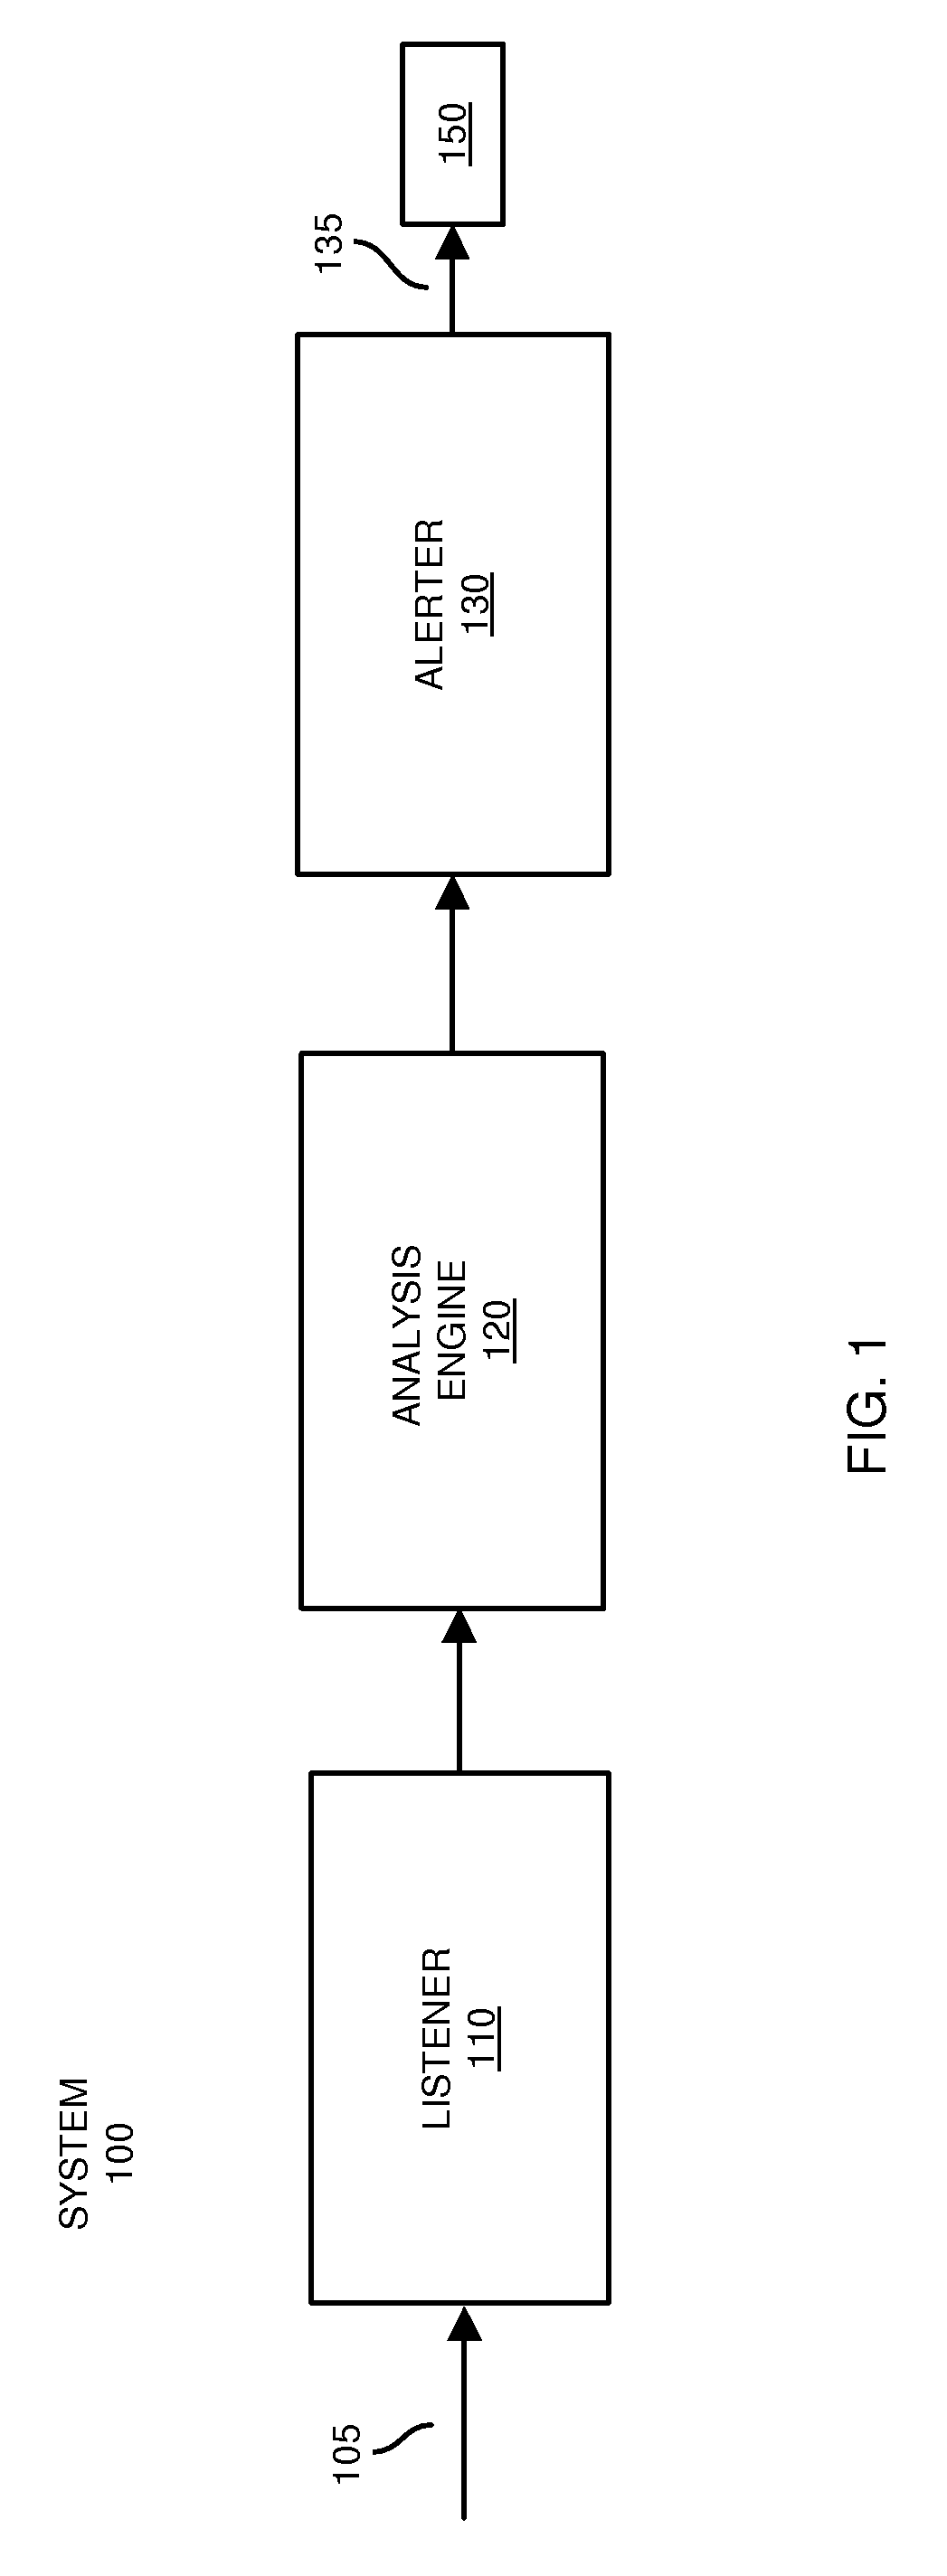 Notification system and methods for use in retail environments